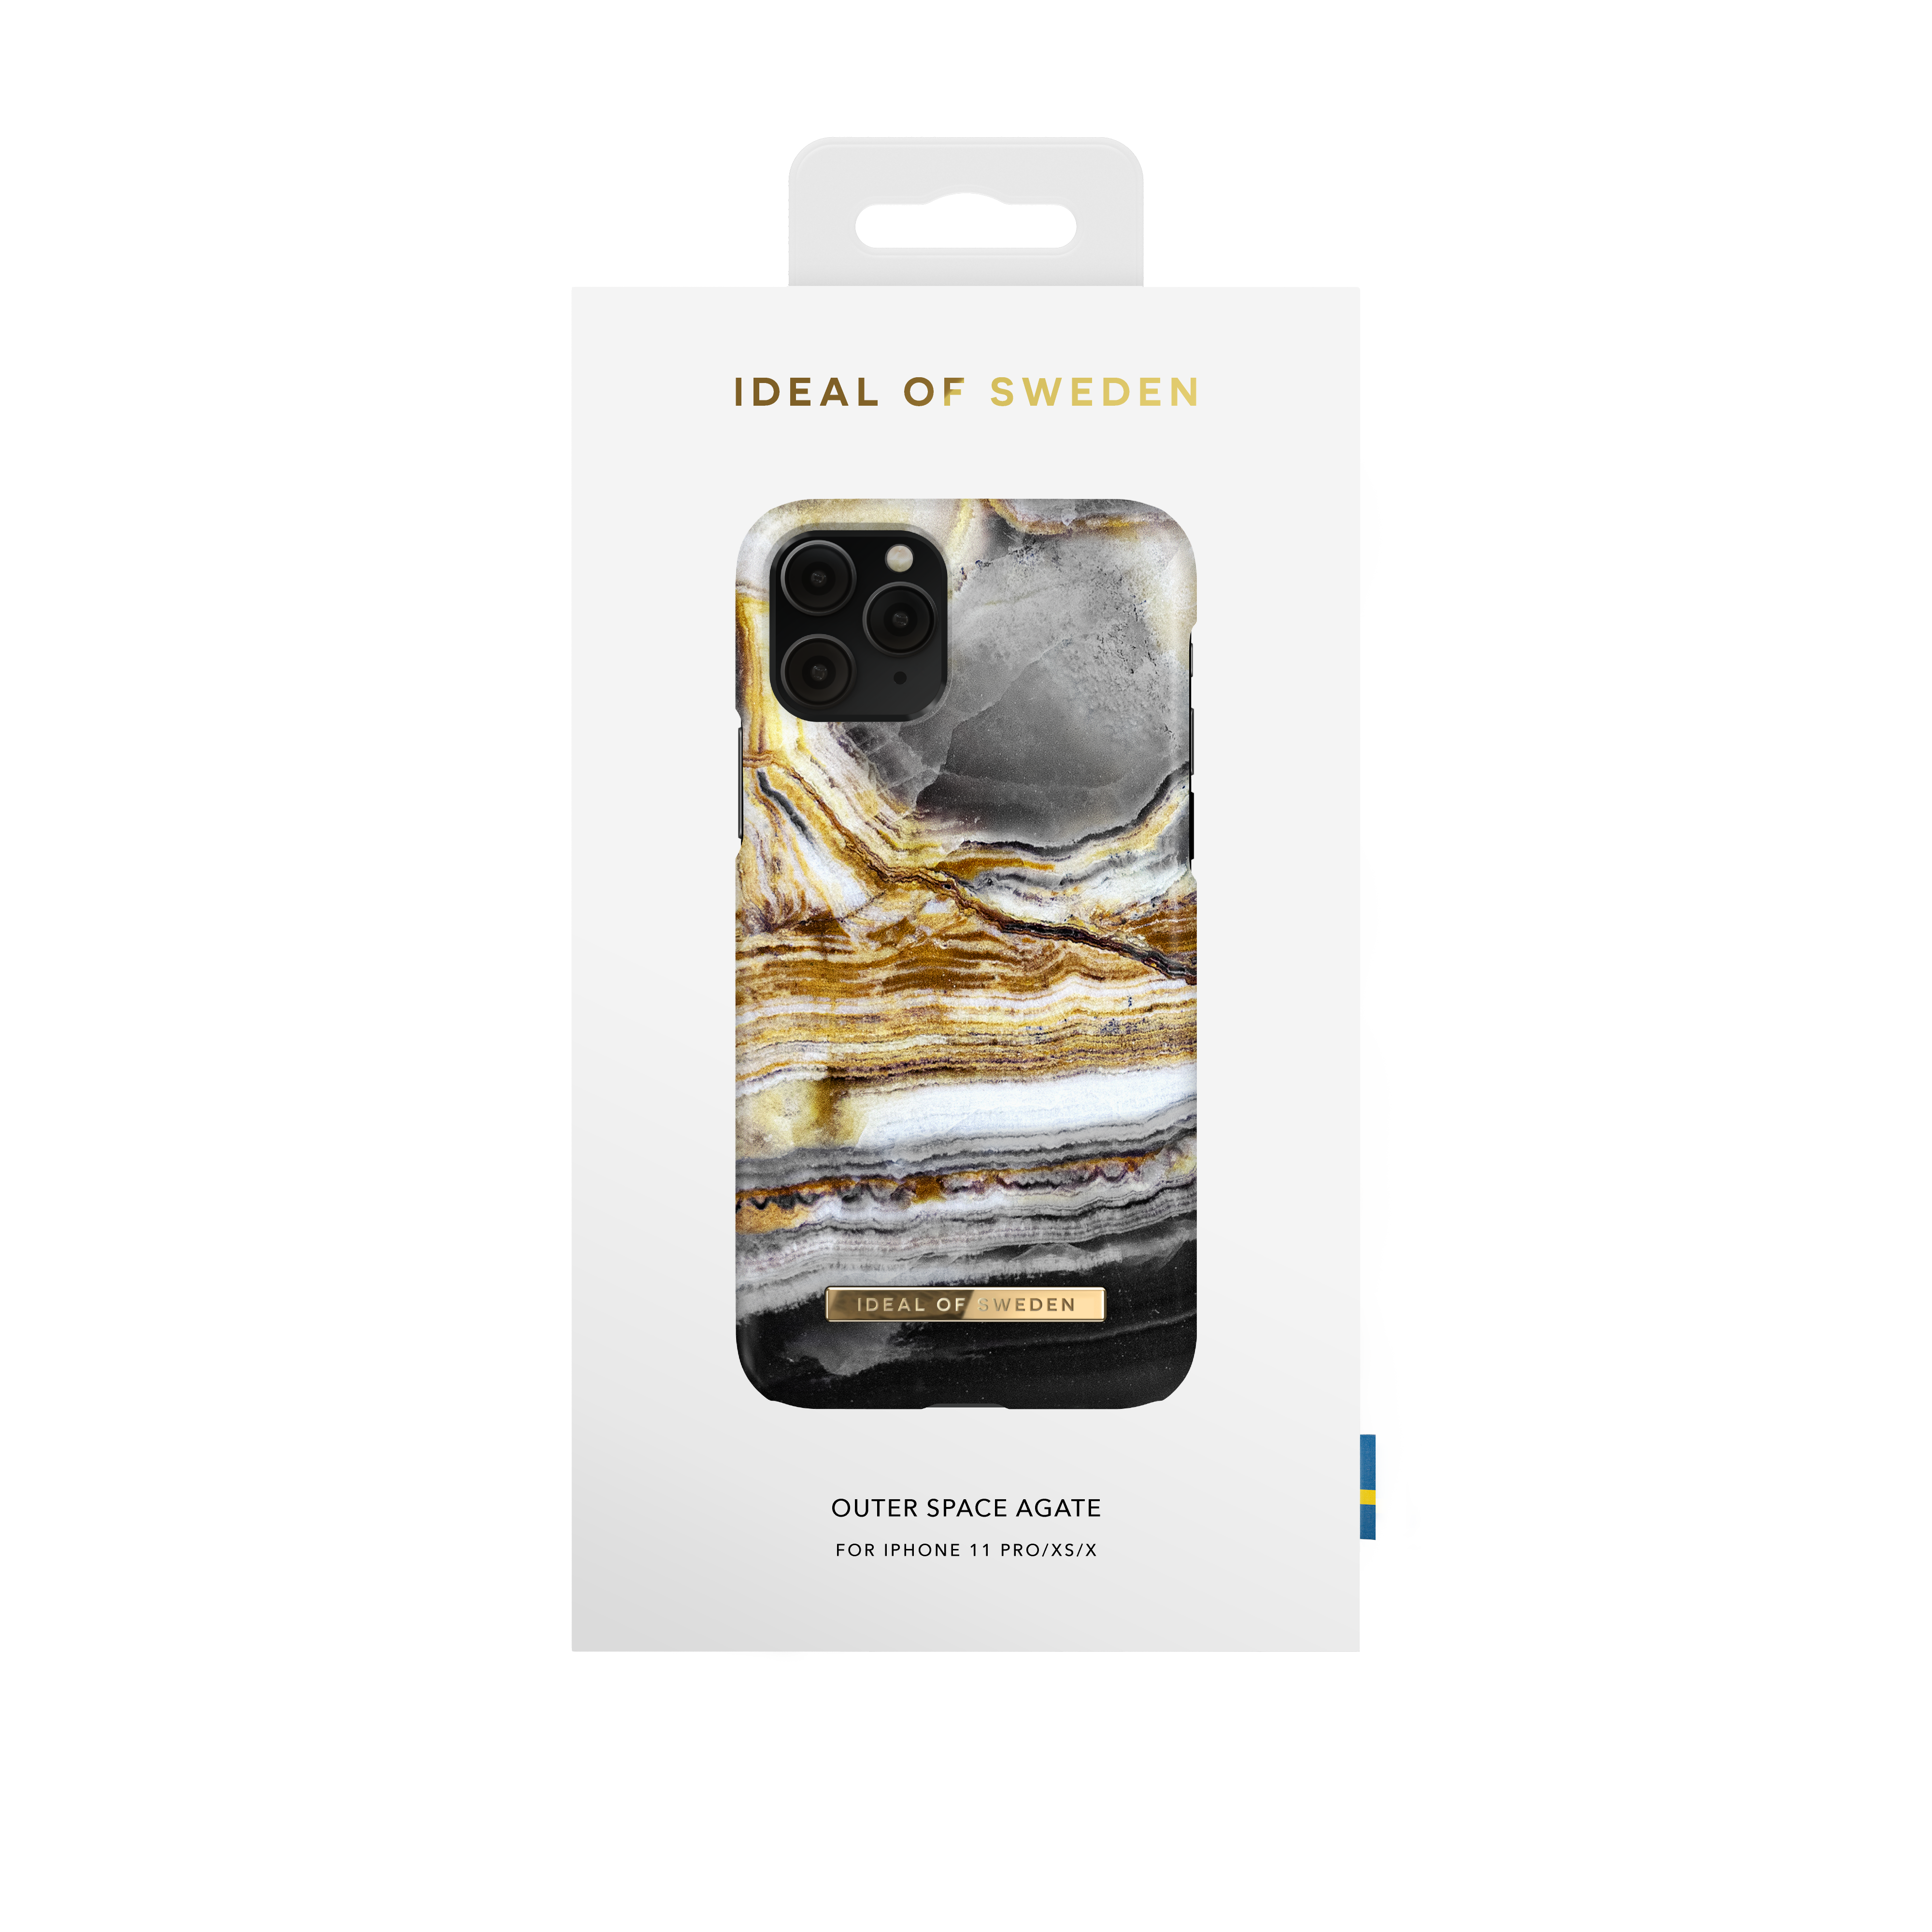 iPhone Marble SWEDEN OF 11 Apple, iPhone XS, Space Backcover, Outer iPhone X, Pro, IDEAL IDFCAW18-I1958-99,